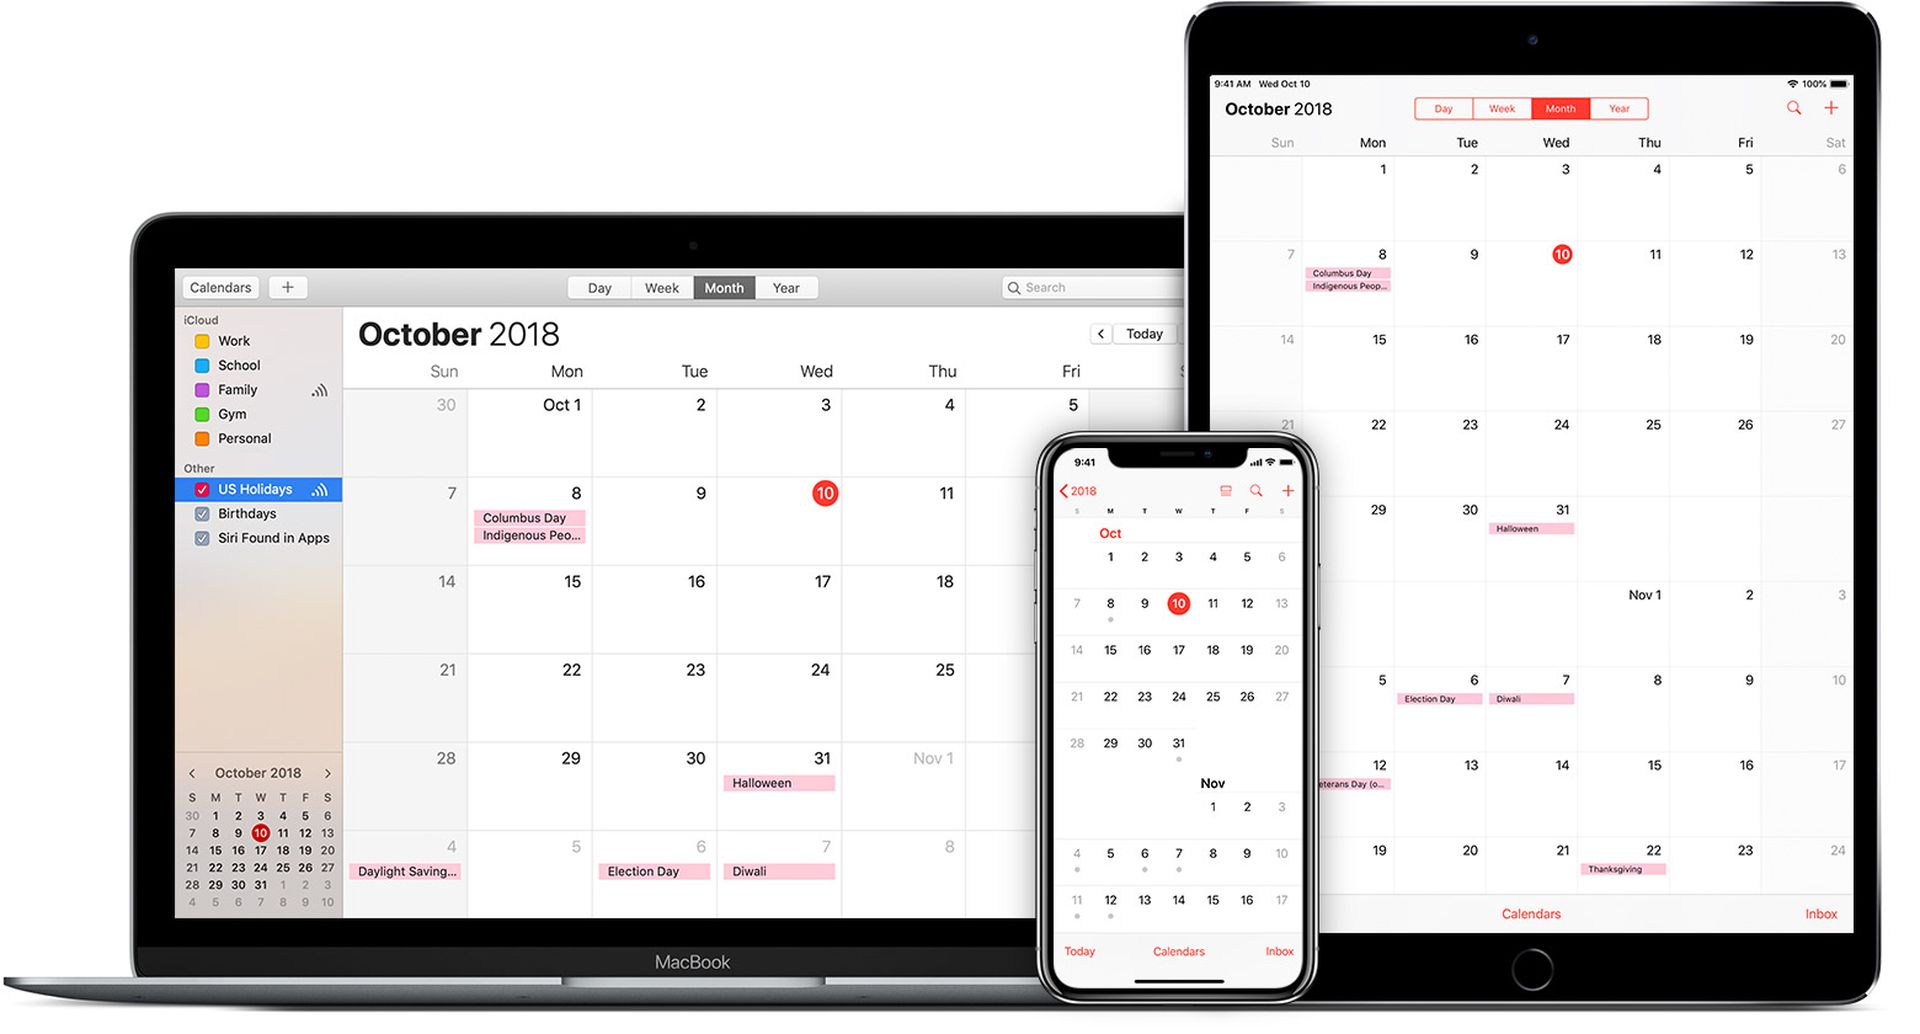 How to change calendar color on iPhone? 1